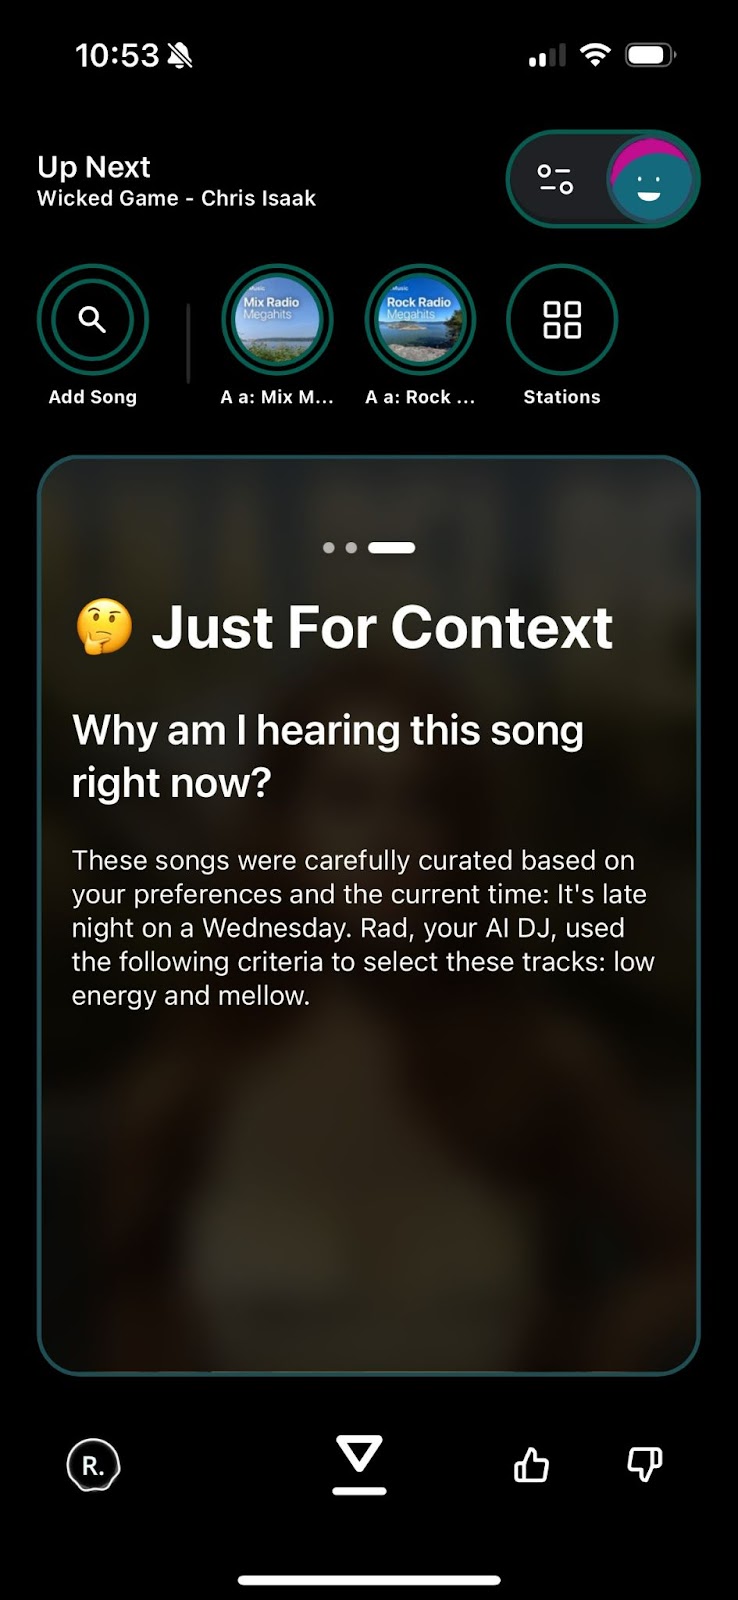 Alt=Radiant app screenshot with an explanation “You hear this song because the choice is based on your preferences and the current time: late Wednesday night, the criteria are low-energy and mellow”